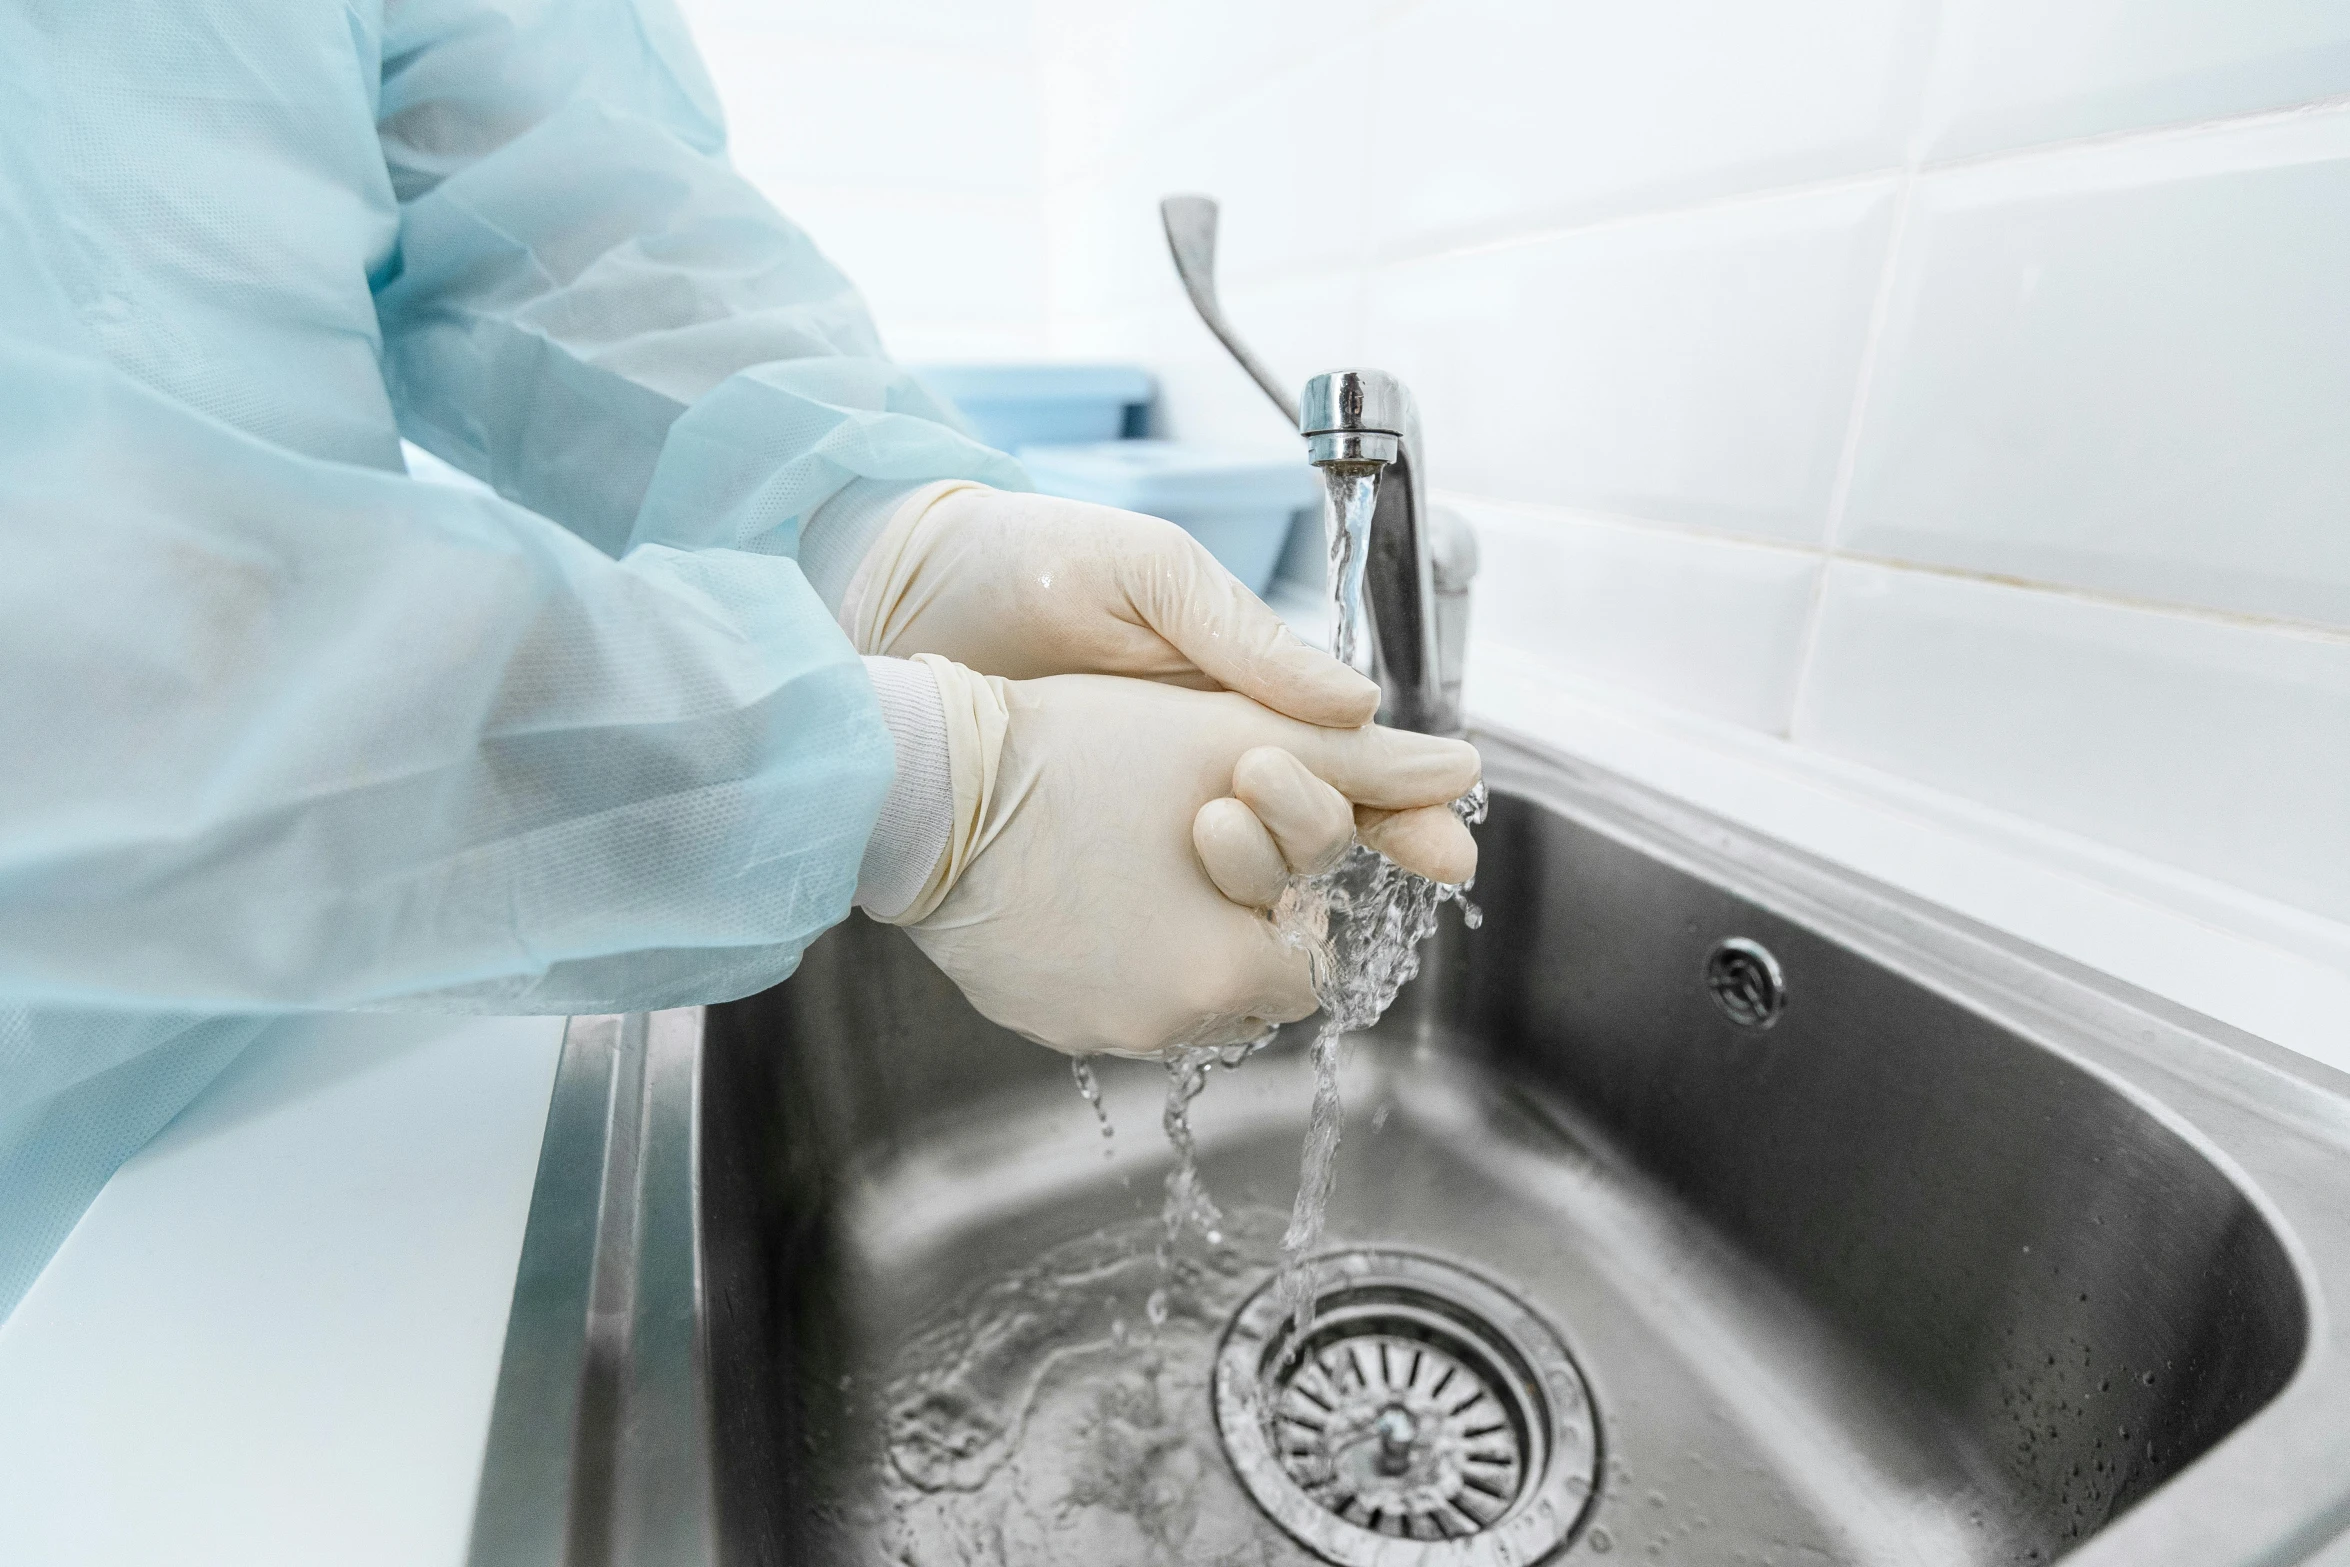 a person in white gloves, in gloves and rubber gloves washes his hand in a kitchen sink